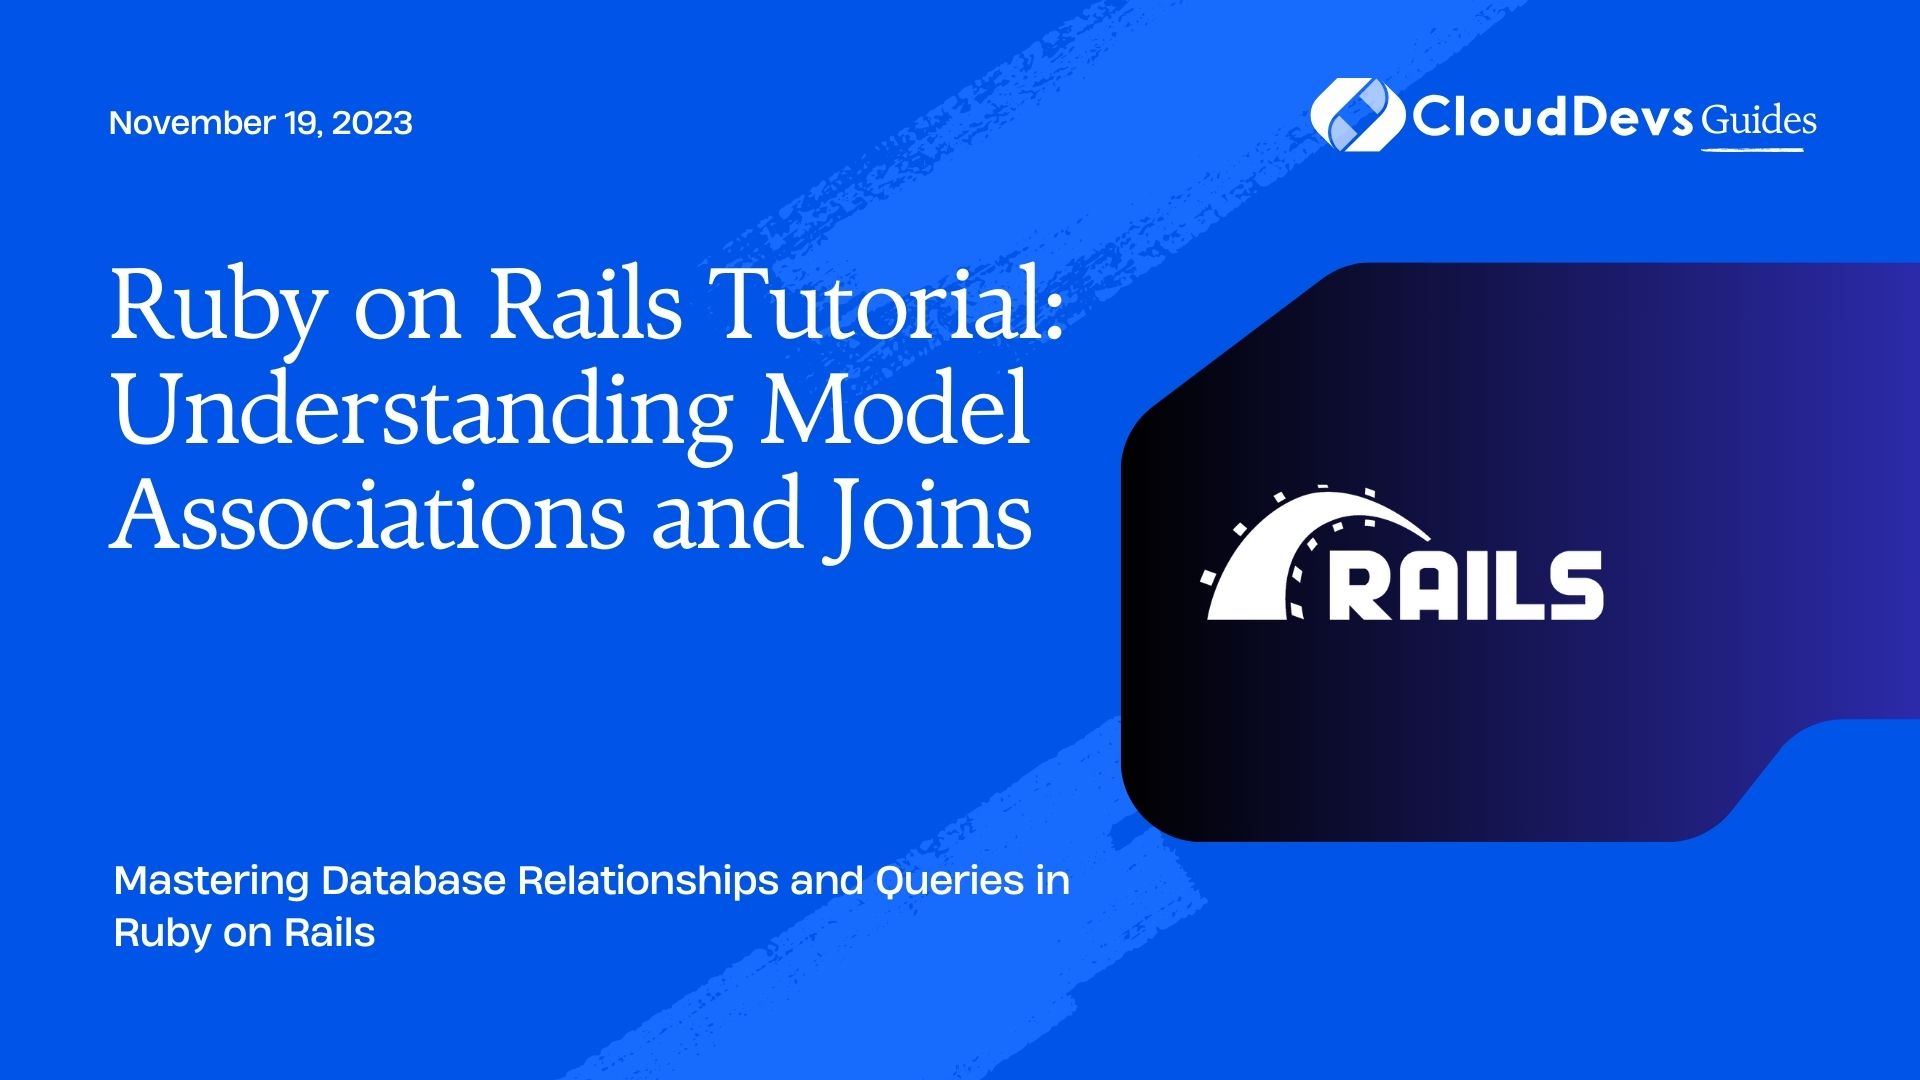 Ruby on Rails Tutorial: Understanding Model Associations and Joins